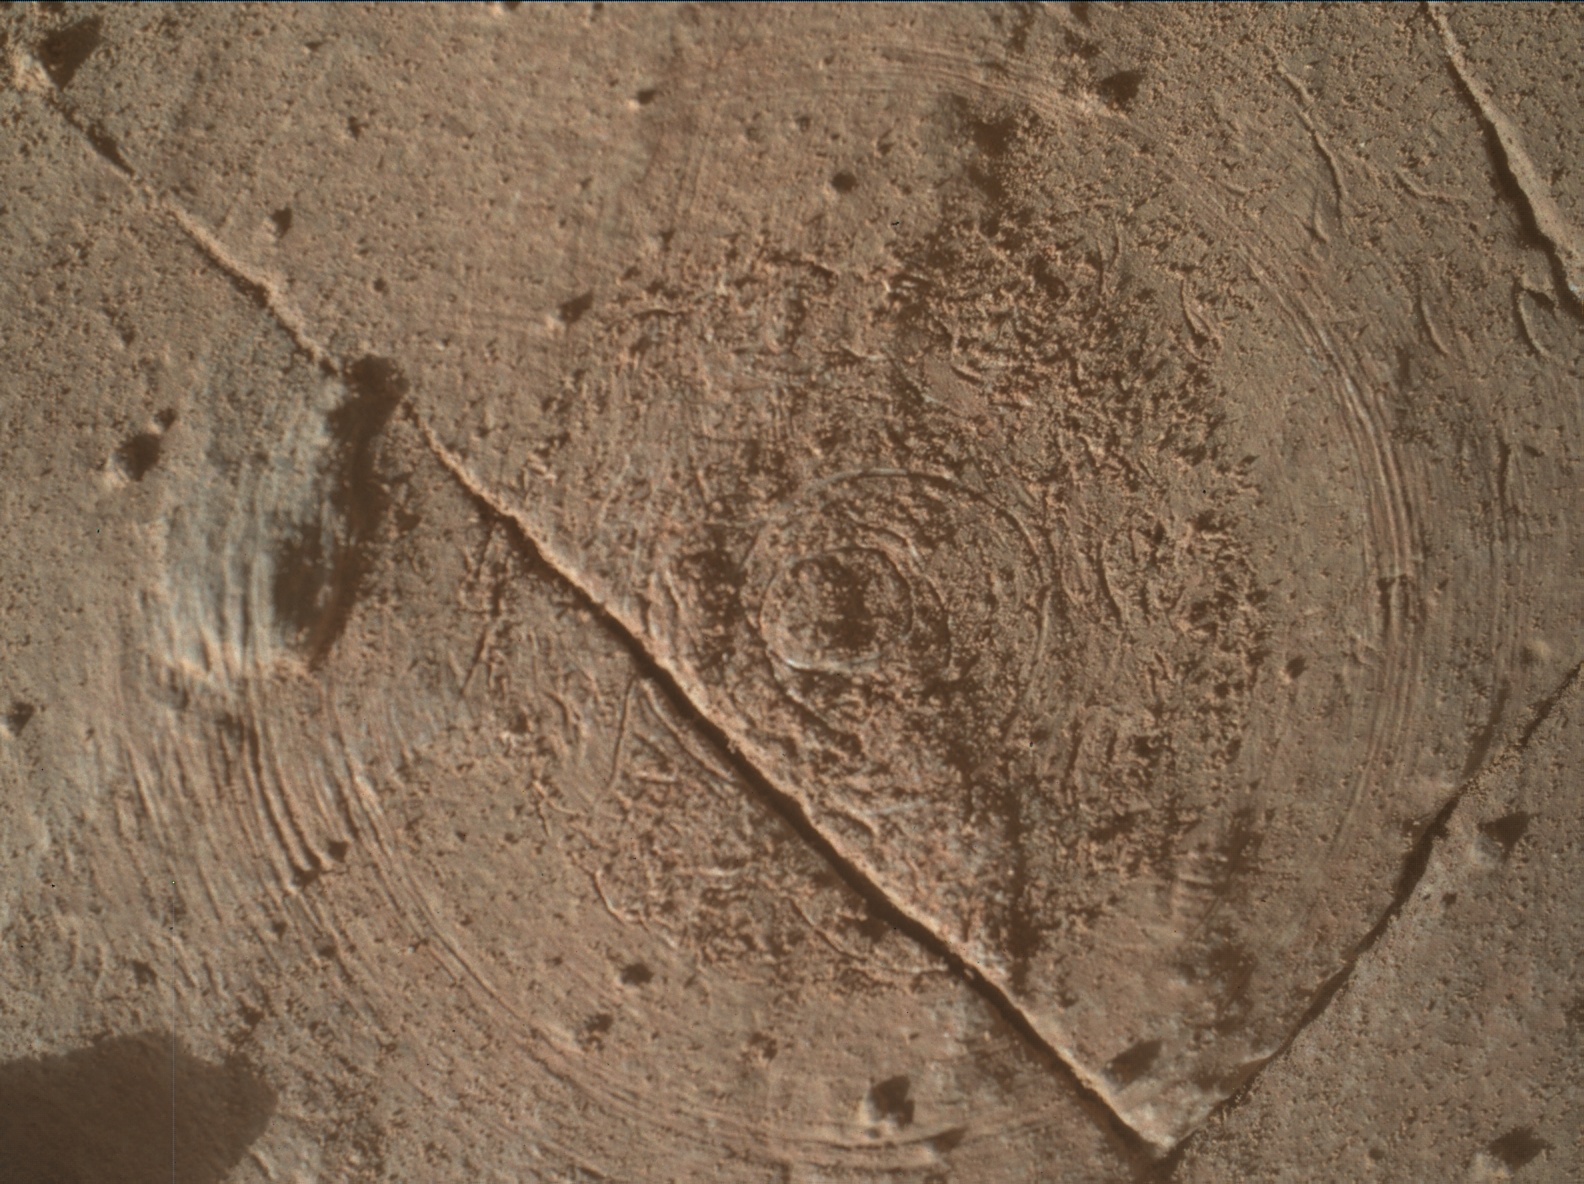 Nasa's Mars rover Curiosity acquired this image using its Mars Hand Lens Imager (MAHLI) on Sol 3144